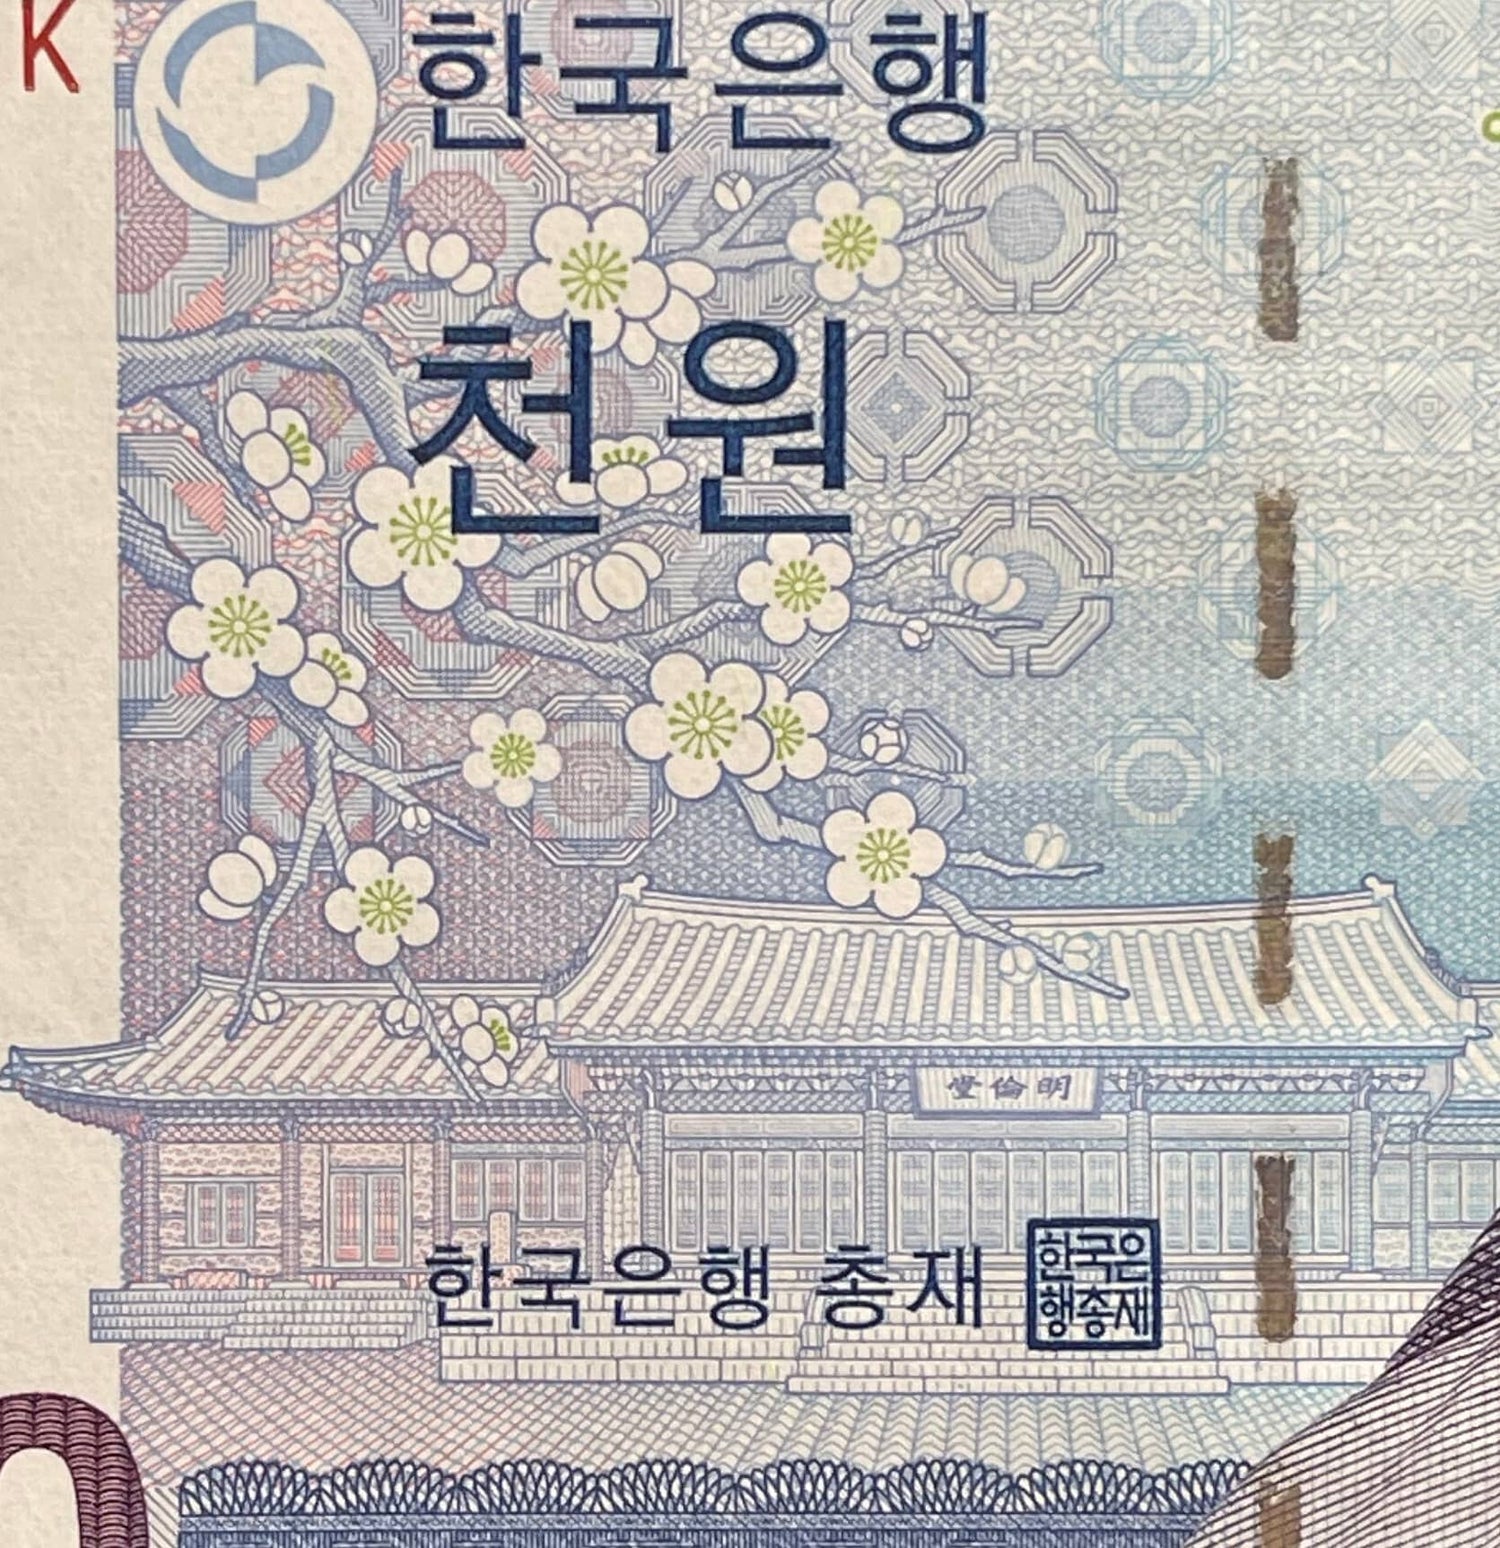 Confucian Sage Yi Hwang & Dosan Seowon Academy 1000 Won Authentic Banknote Money for Jewelry and Collage (2007) Toegye (Green Plum Blossoms)